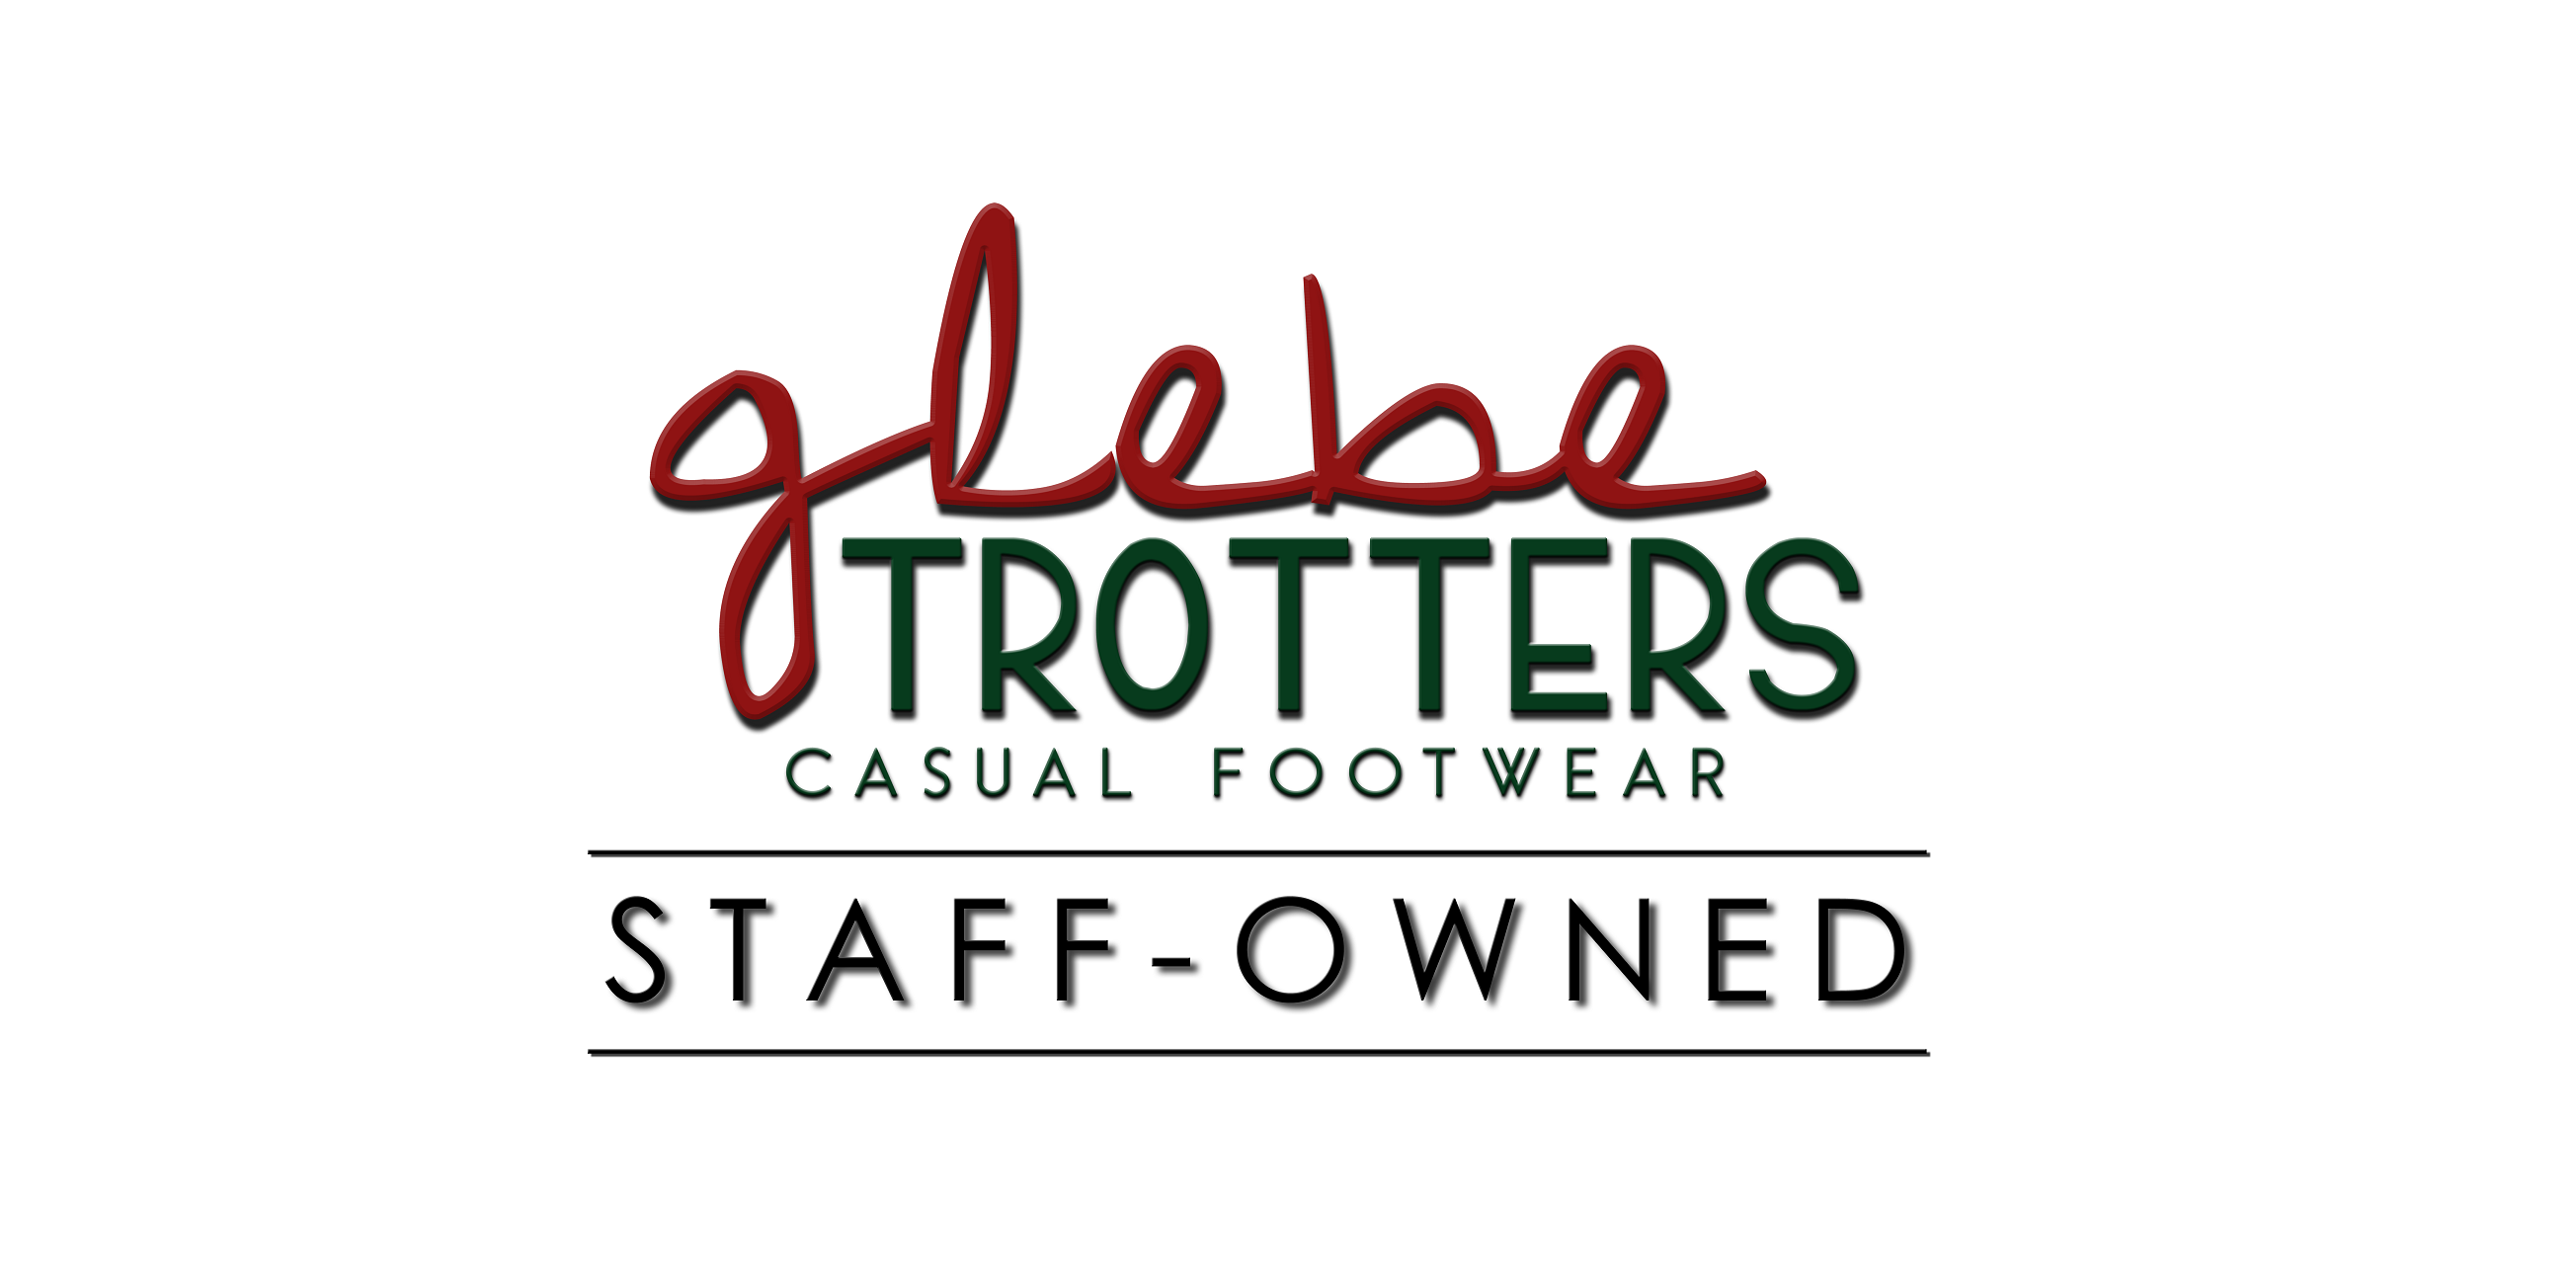 Glebe Trotters staff-owned shoes logo